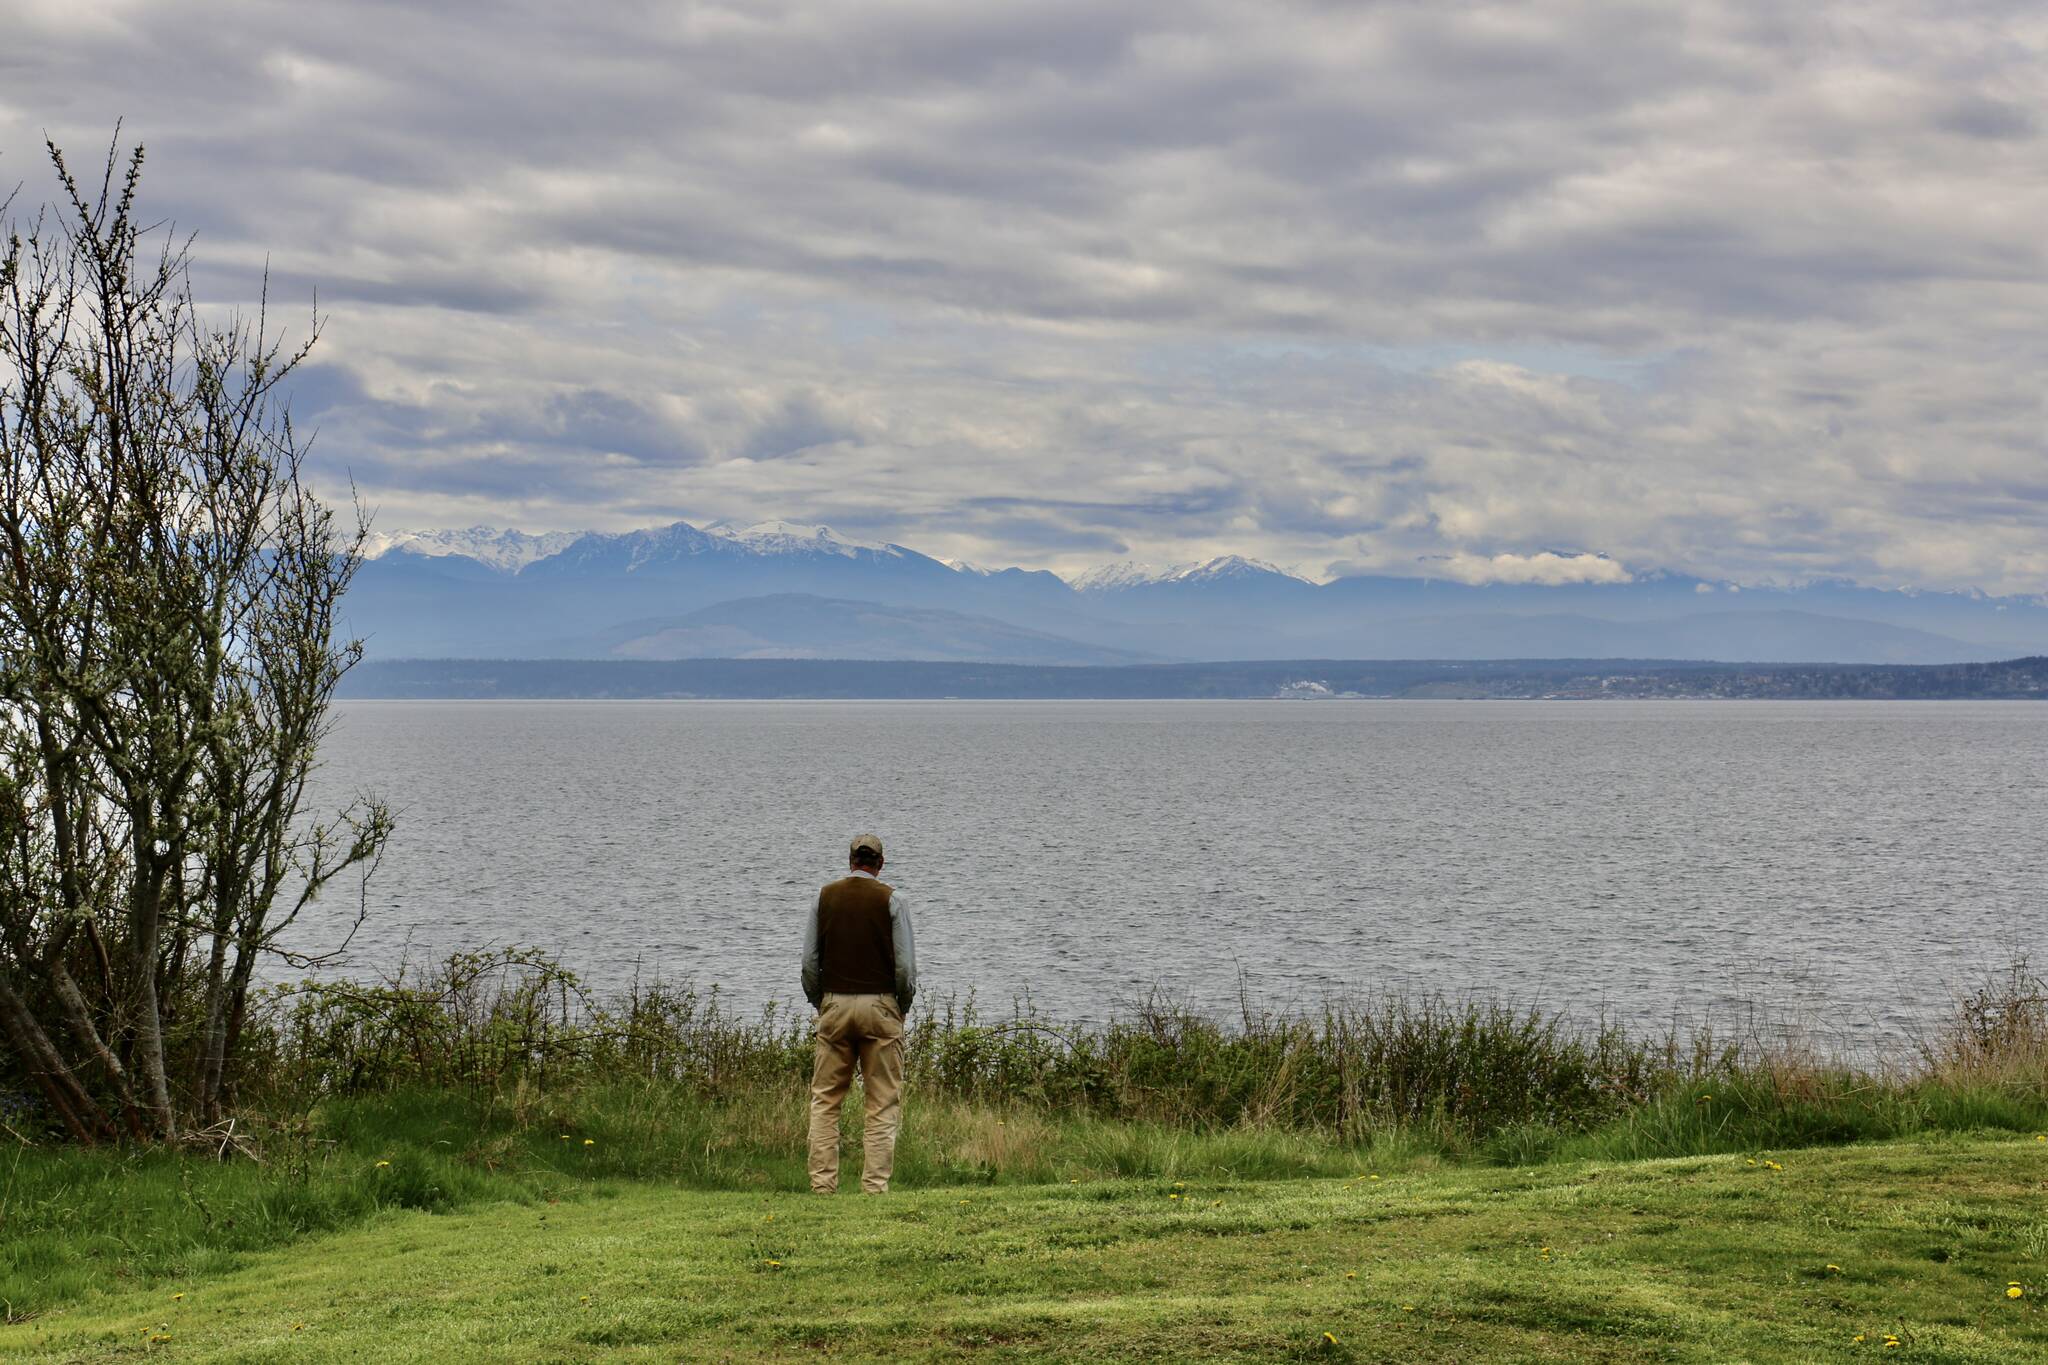 Photo provided
The Keystone Preserve is located on Central Whidbey and is expected to be open to the public in 2025.